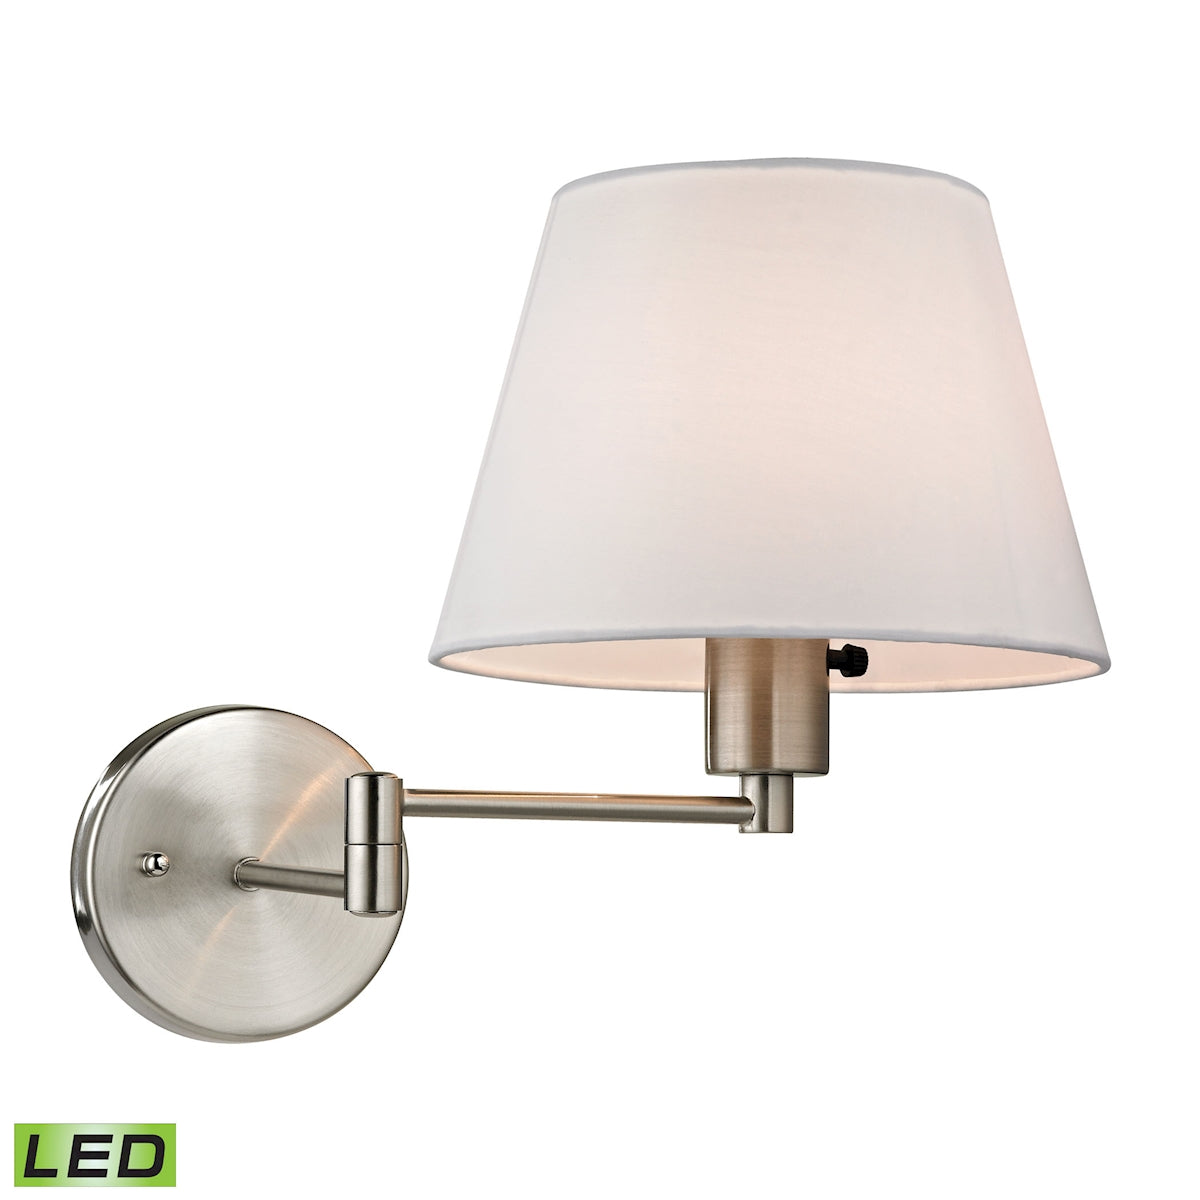 ELK Lighting 17153/1-LED - Avenal 9" Wide 1-Light Swingarm Wall Lamp in Brushed Nickel with White Fa